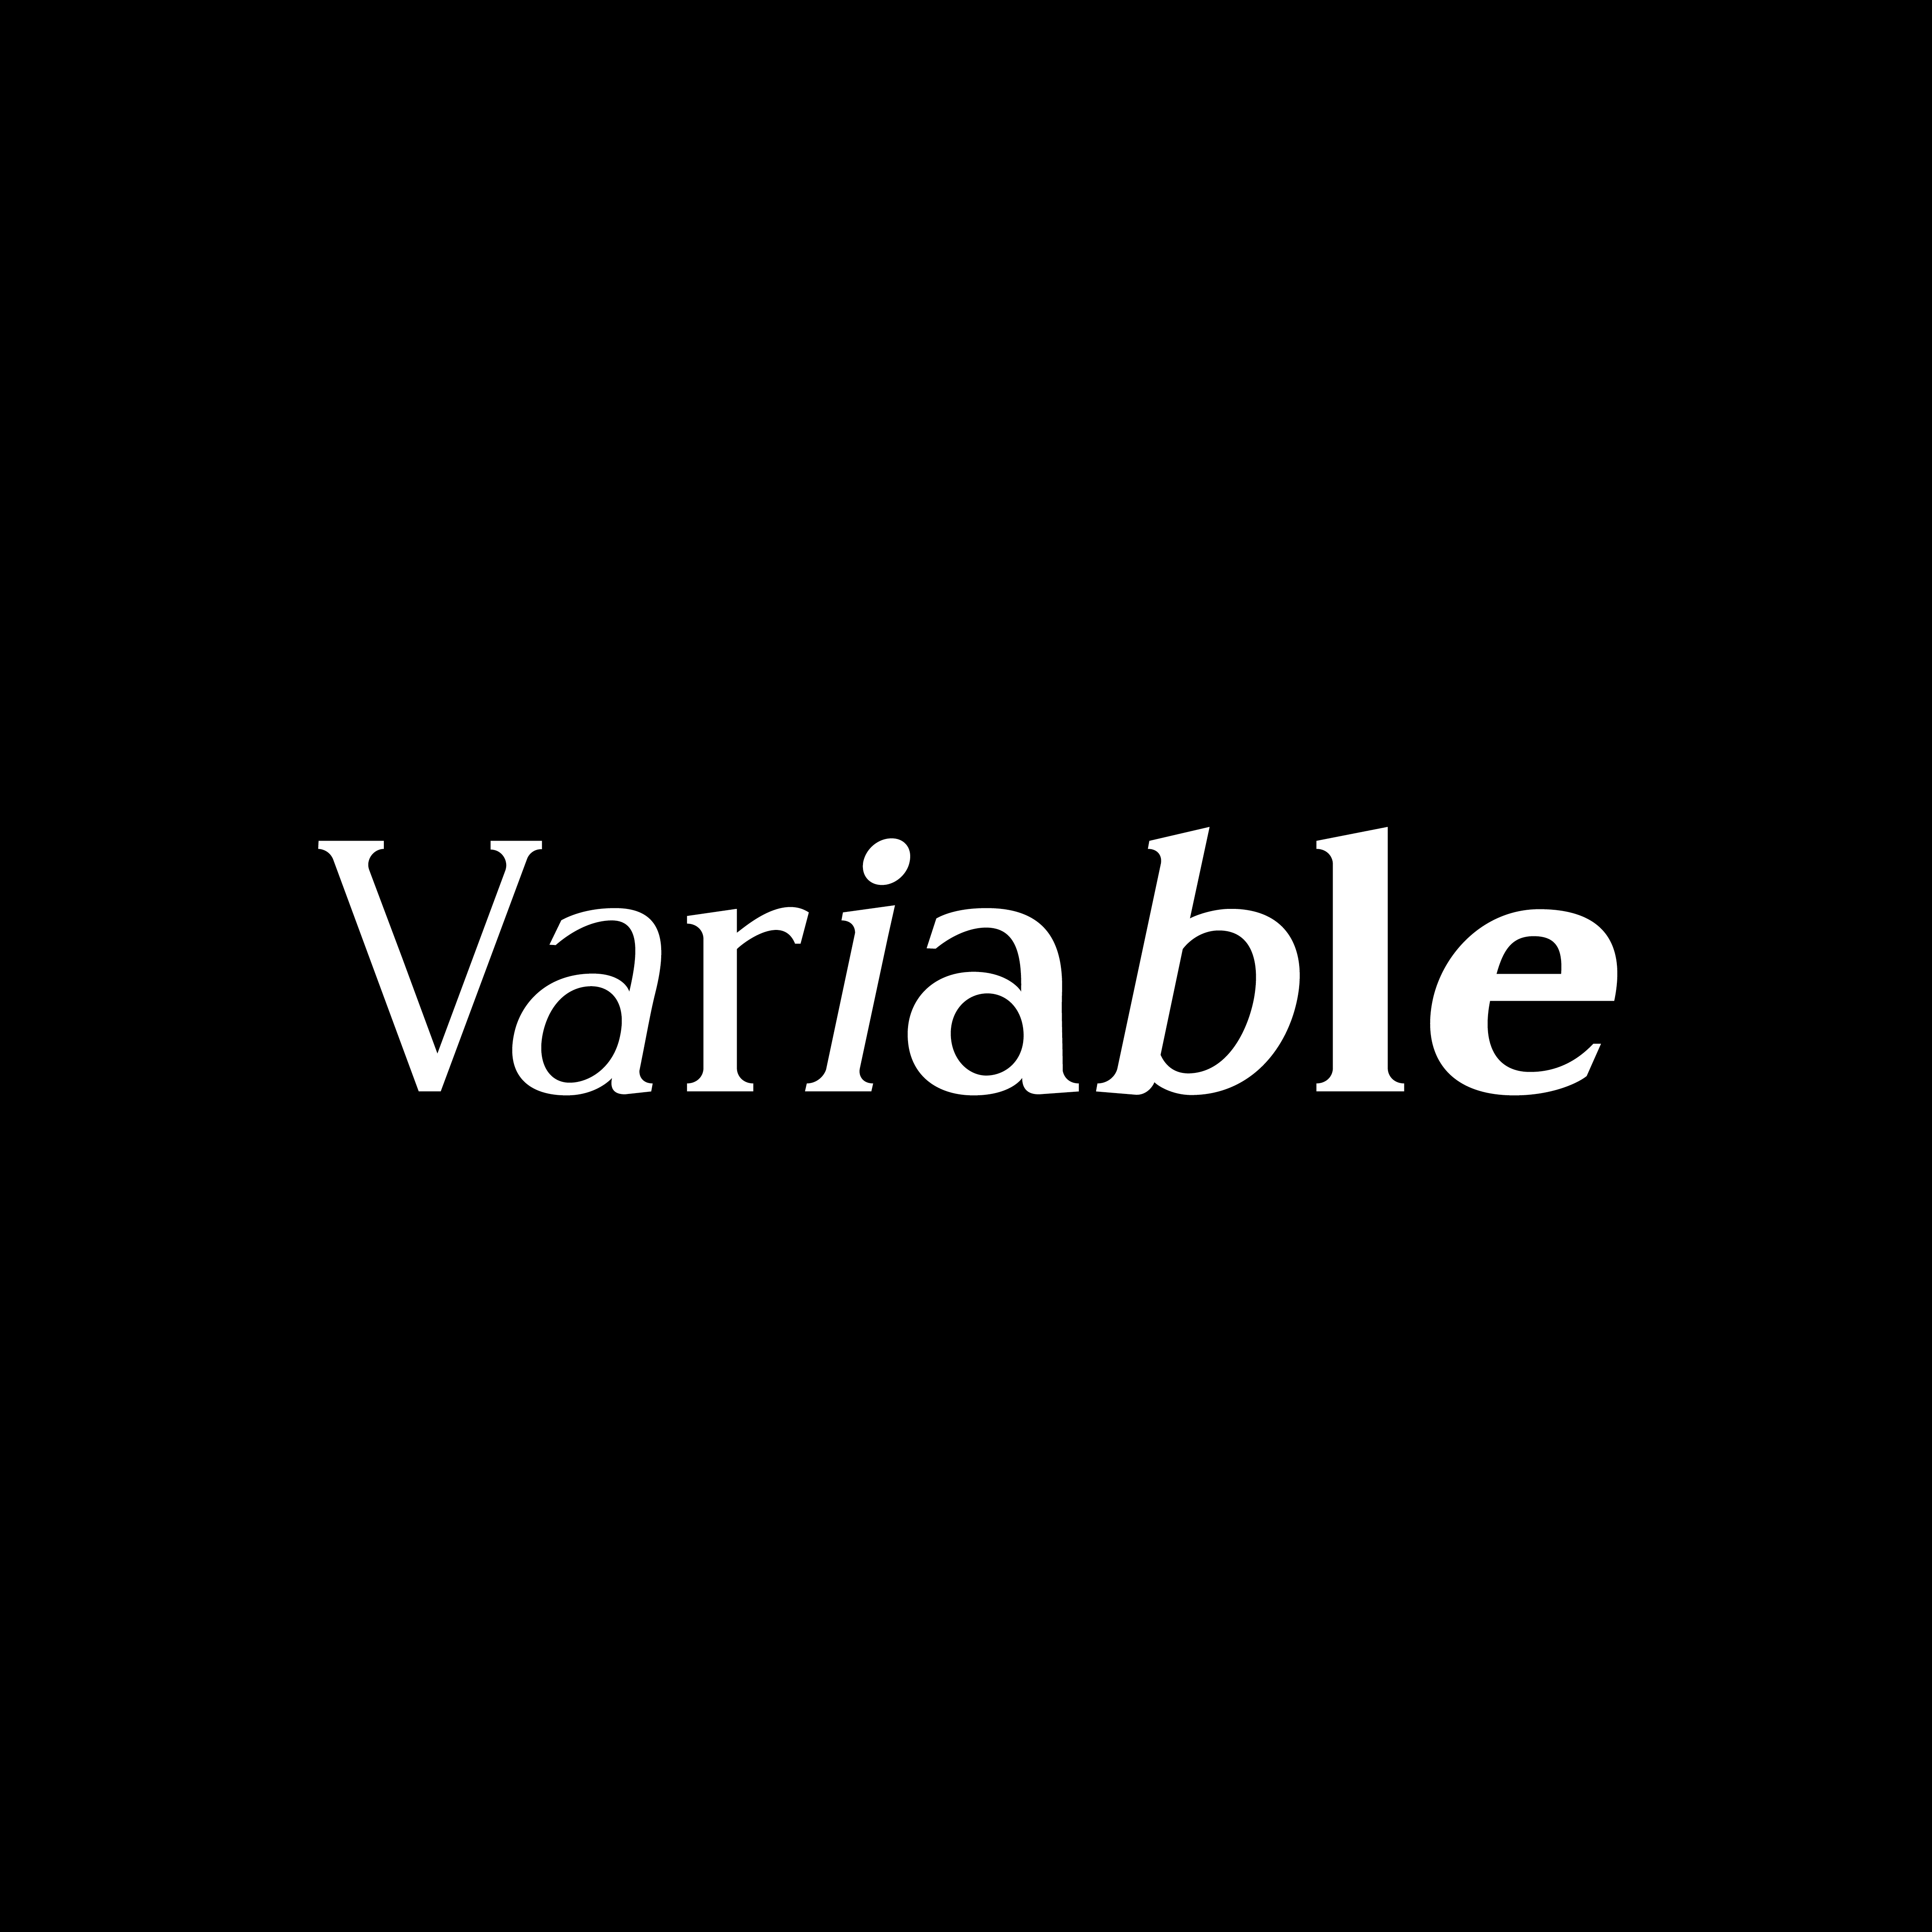 Variable